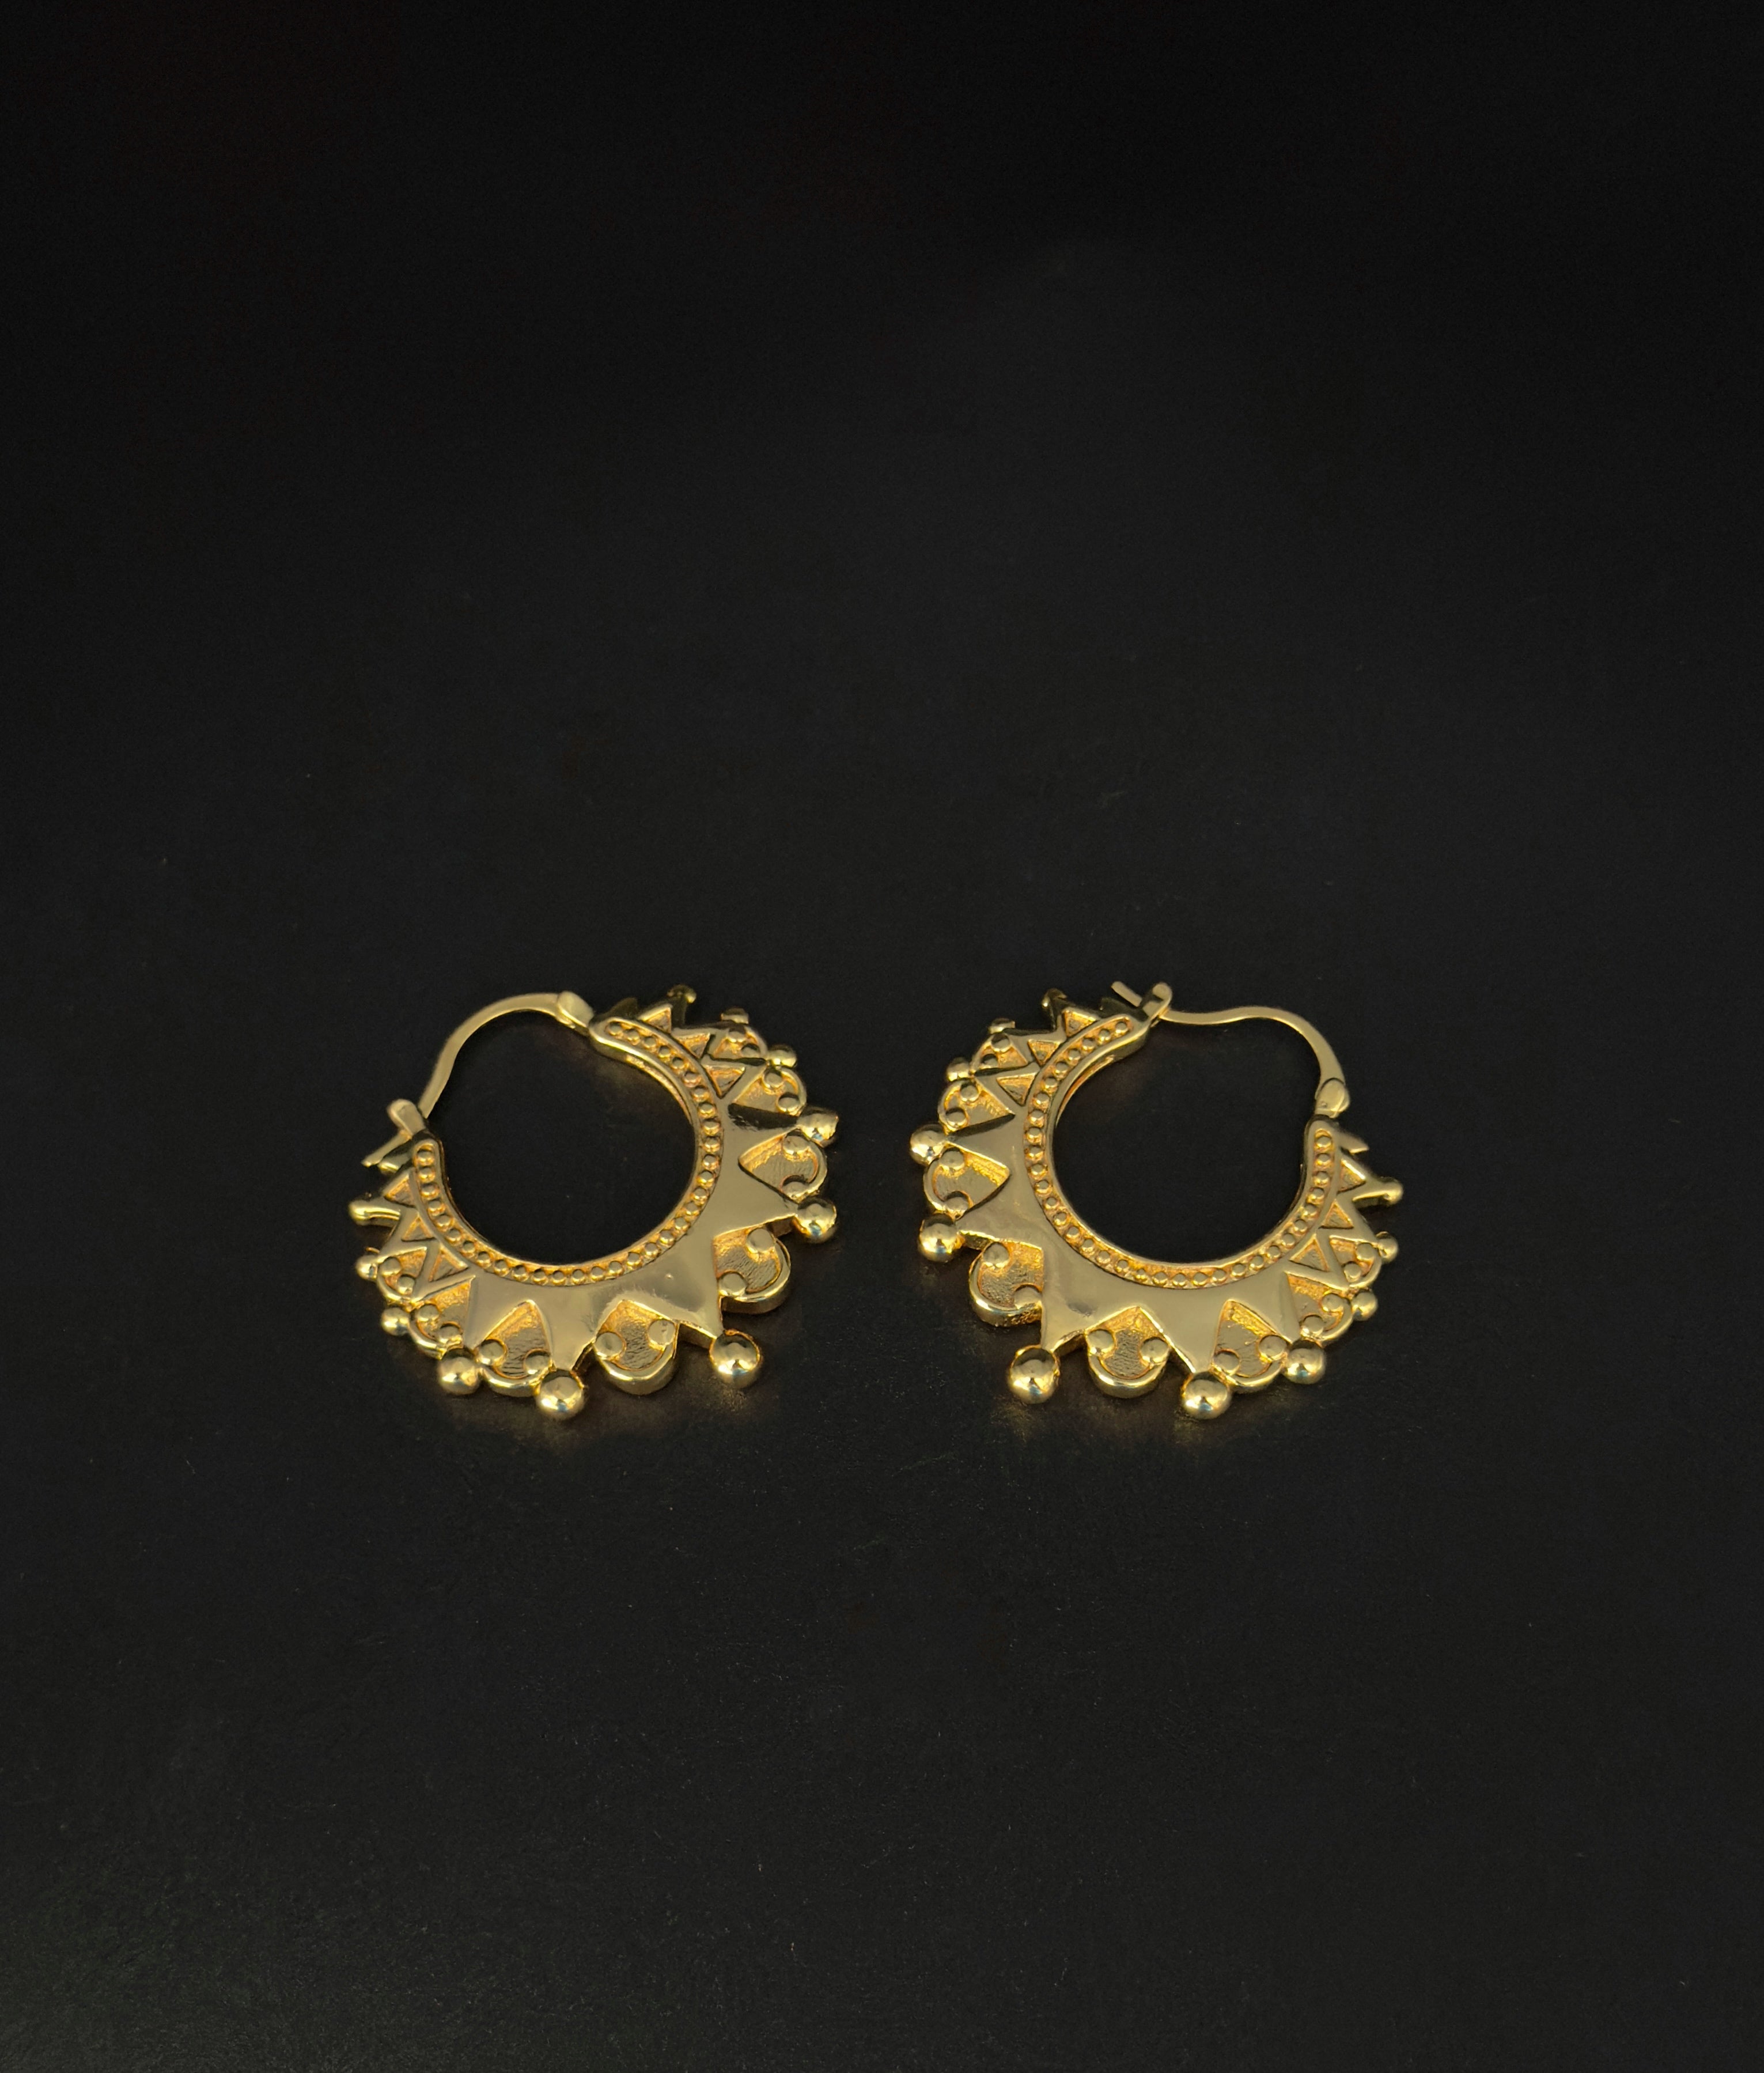 9ct Gold filled Creole Earrings Small